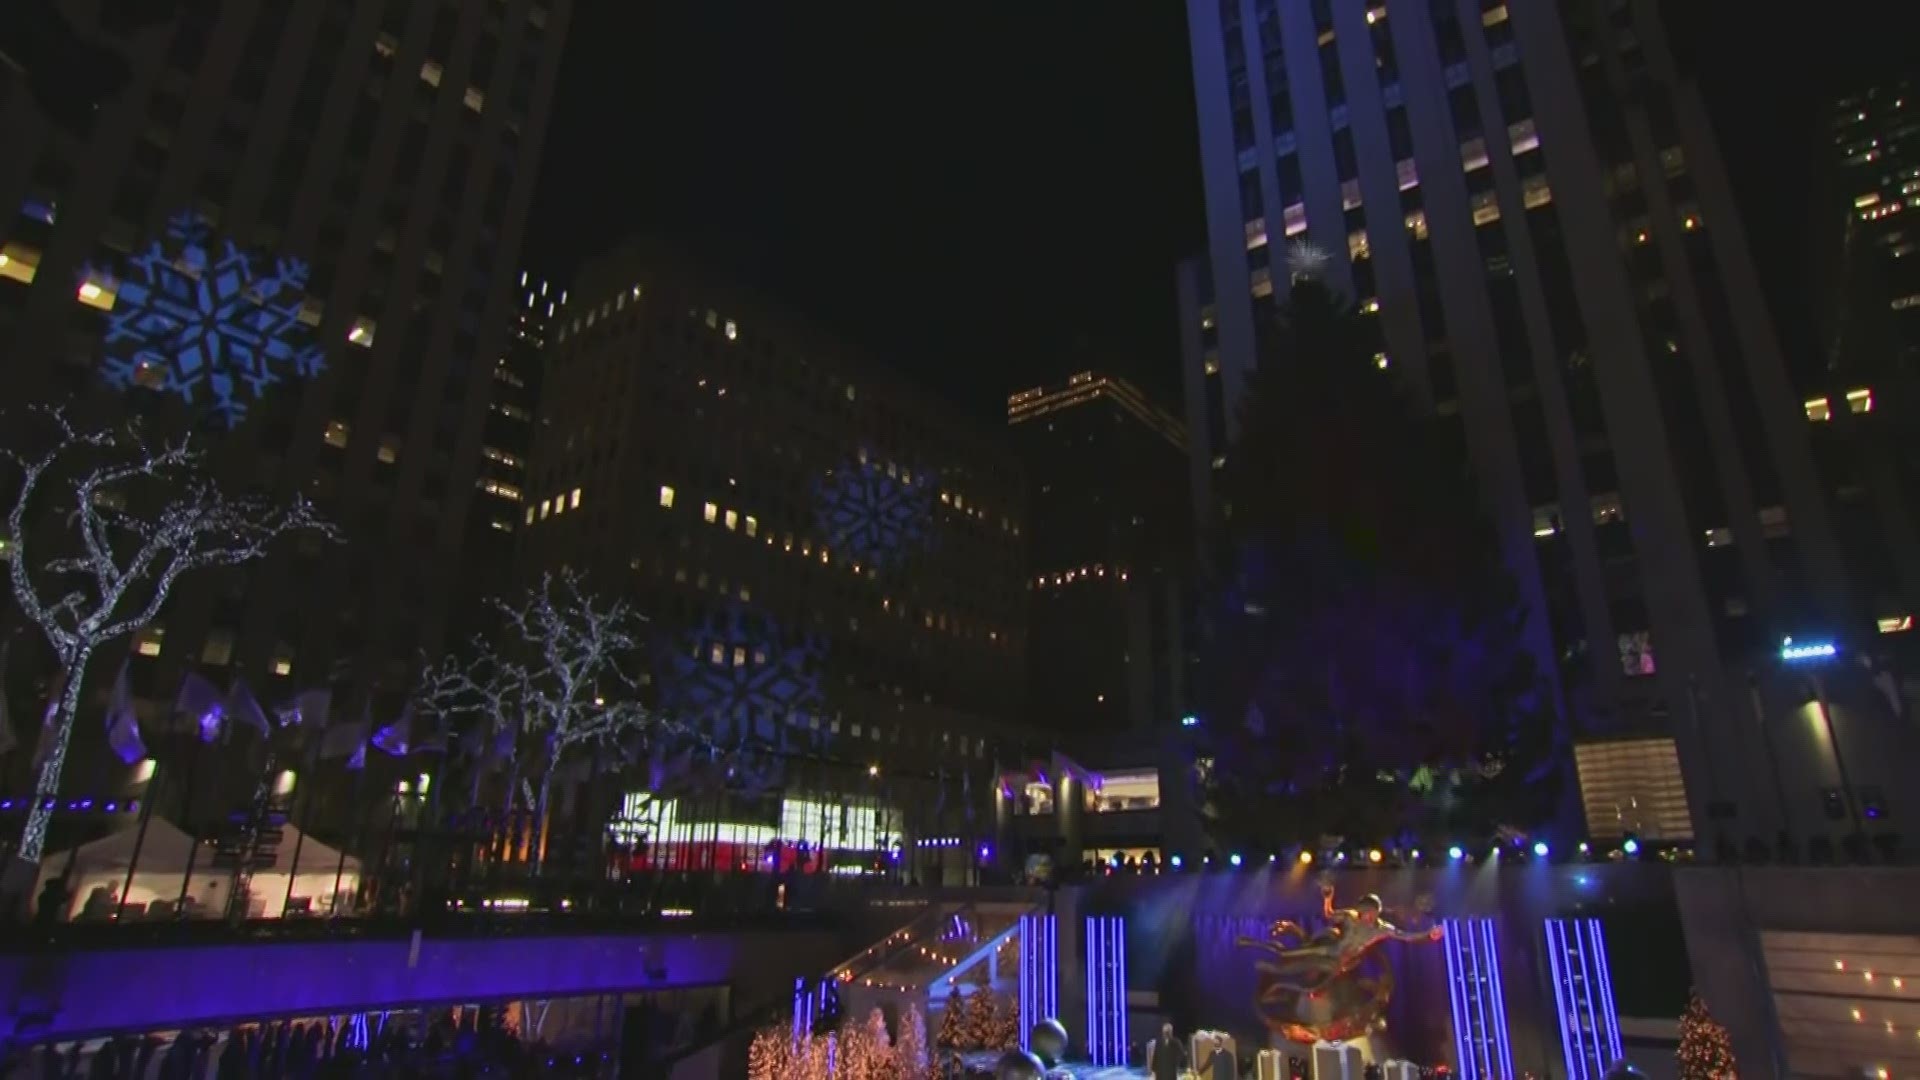 Rockin' around the Christmas tree looks different for visitors at New York City's Rockefeller Center this year, starting with the tree lighting ceremony.